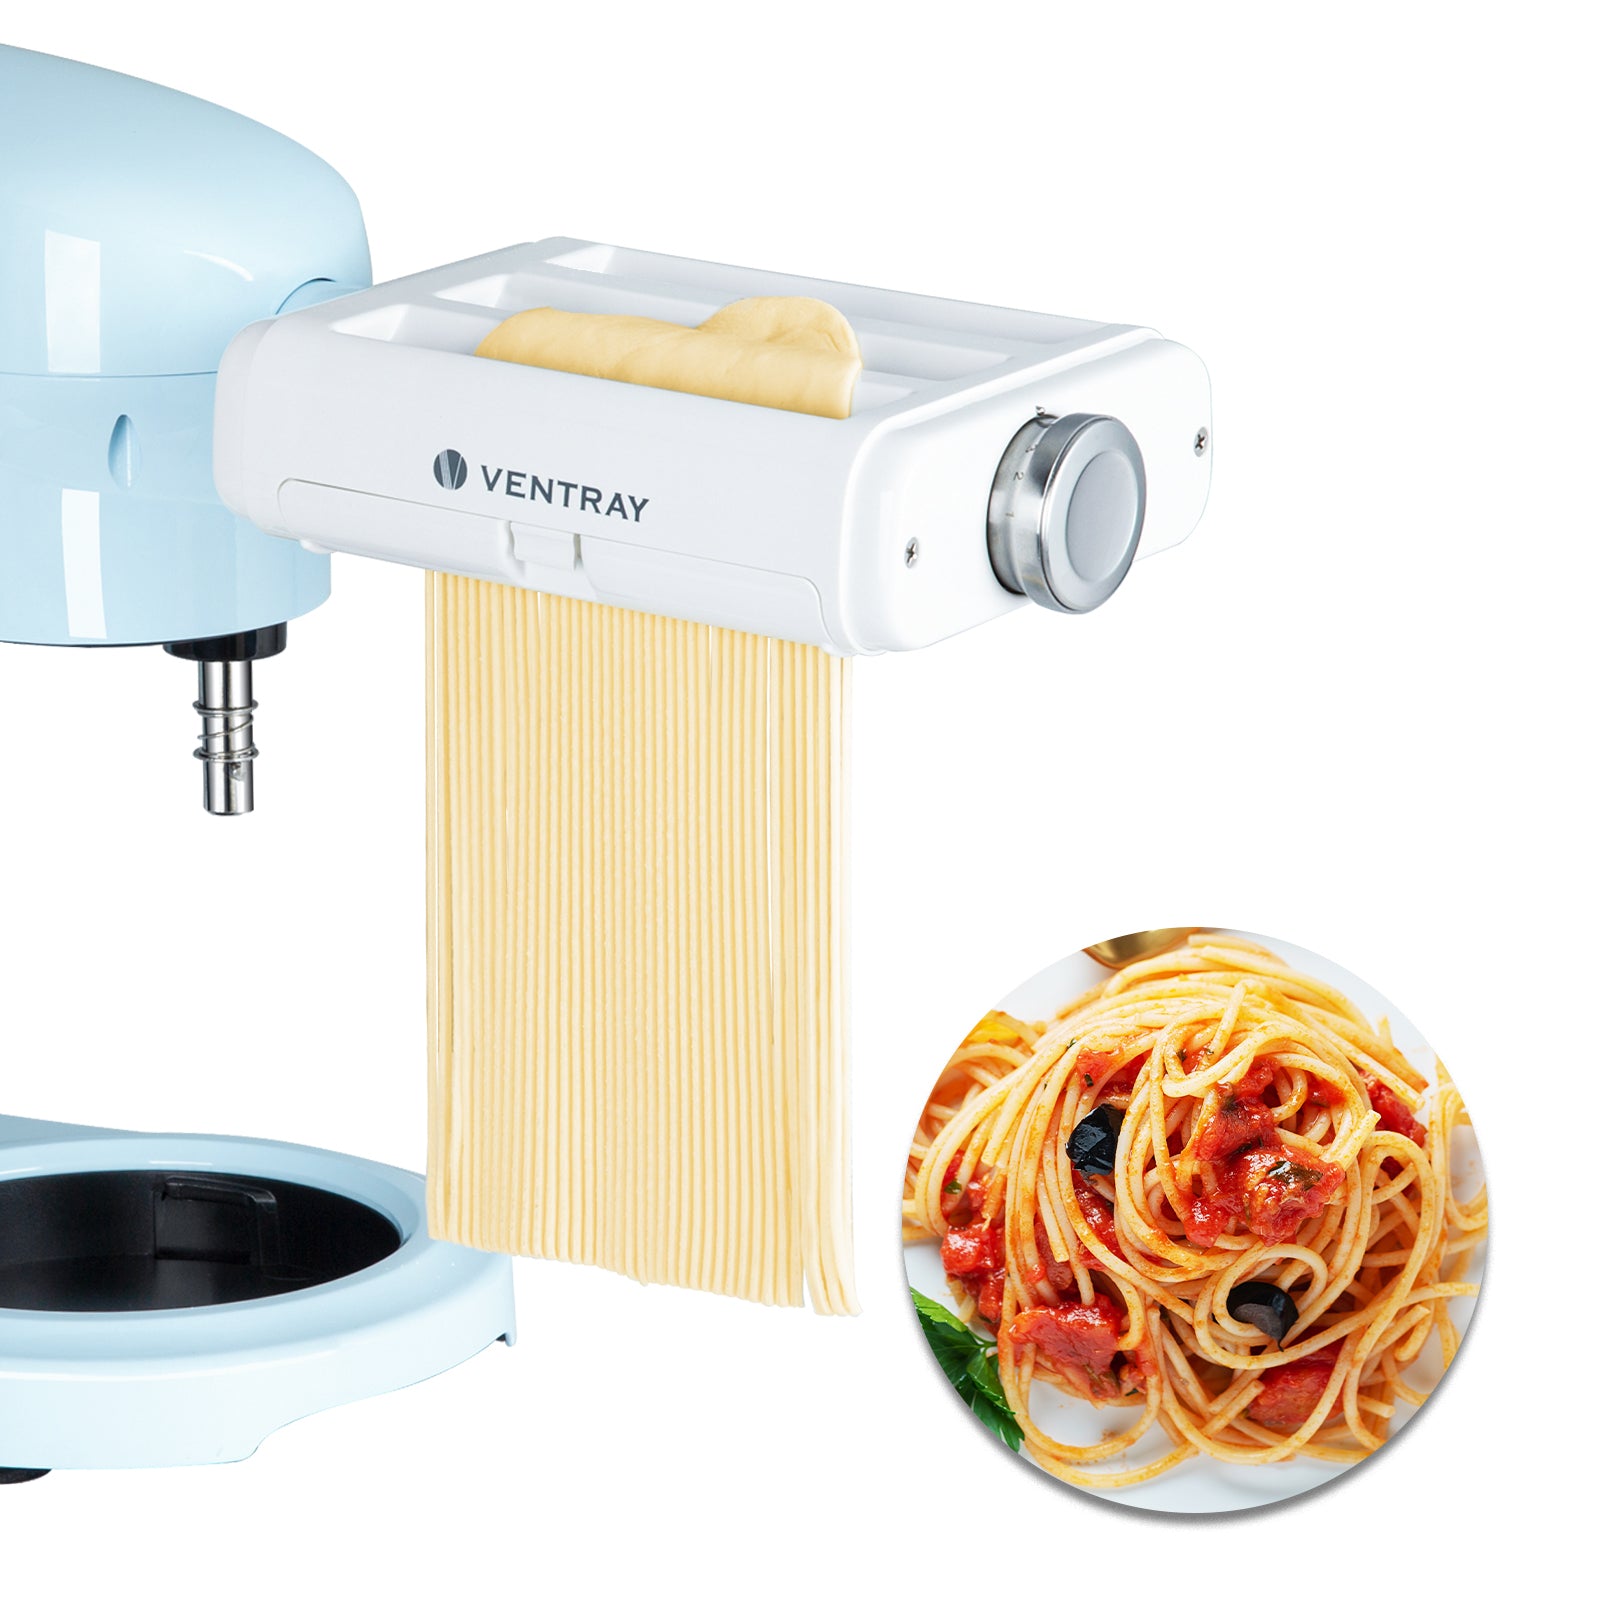 3 In 1 Pasta Maker Attachment For KitchenAid Stand Mixers By